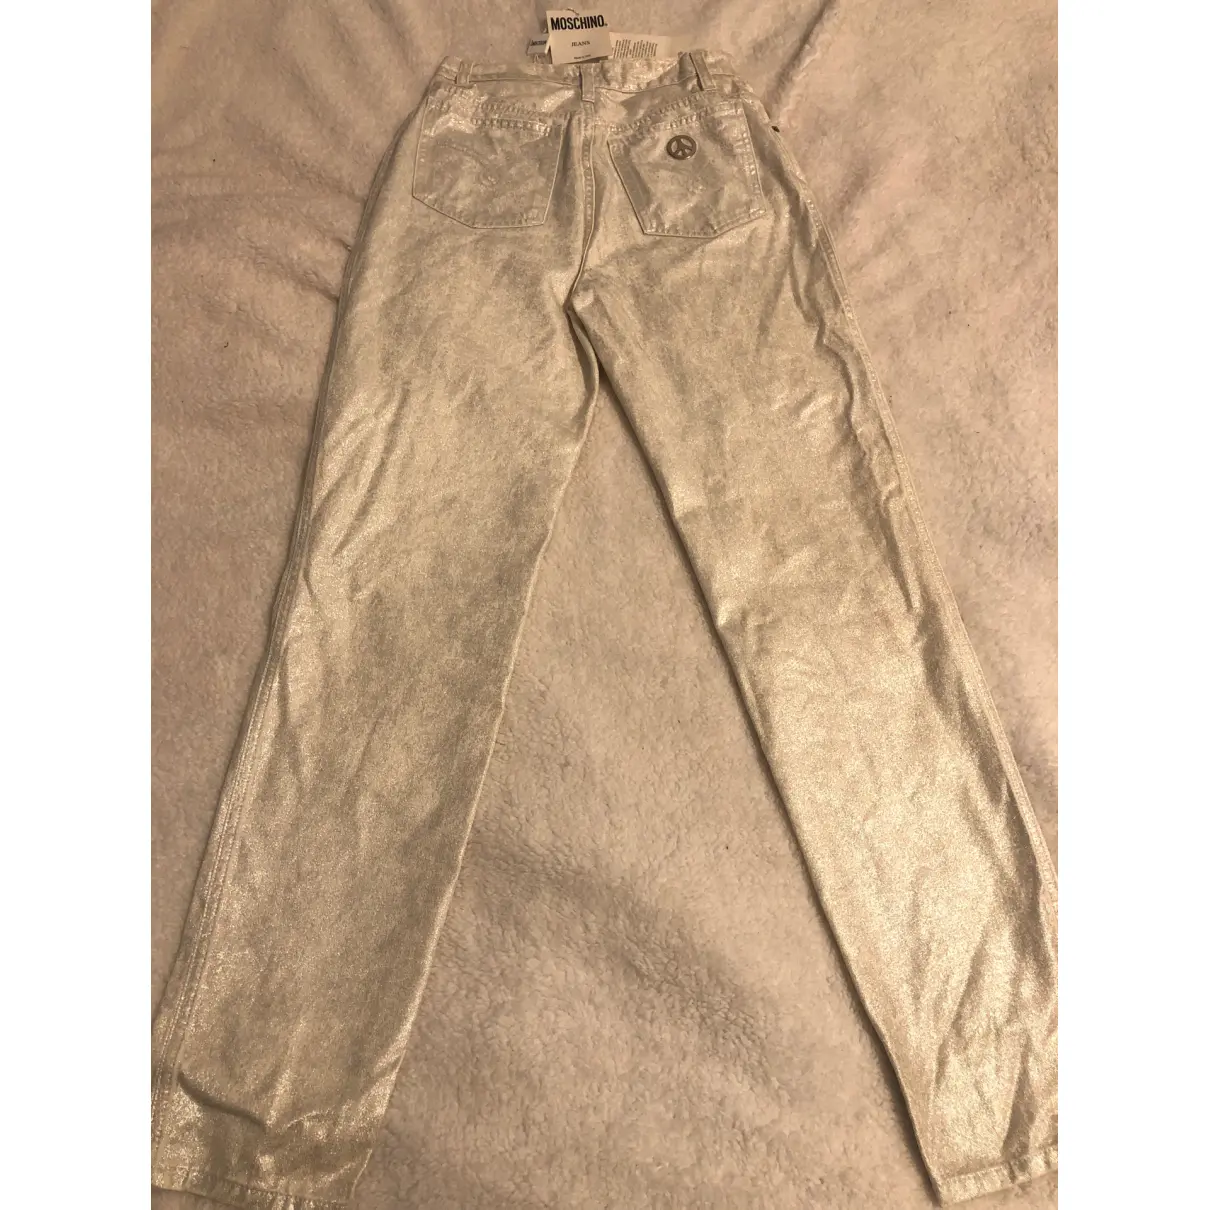 Buy Moschino Jeans online - Vintage